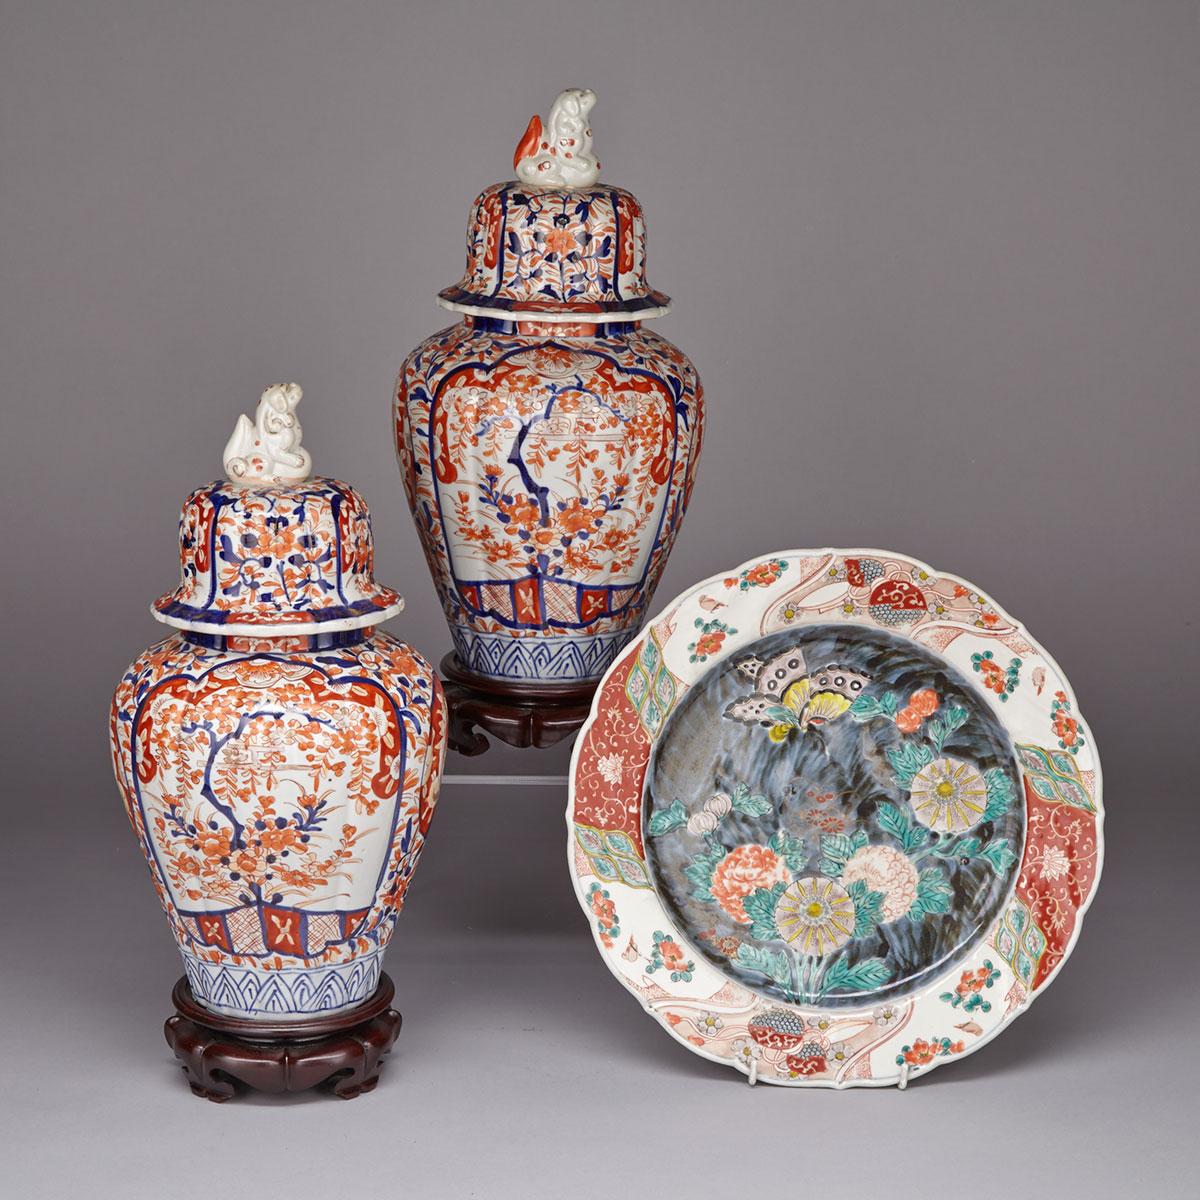 Pair of Fluted Imari Jars and Covers, 19th Century